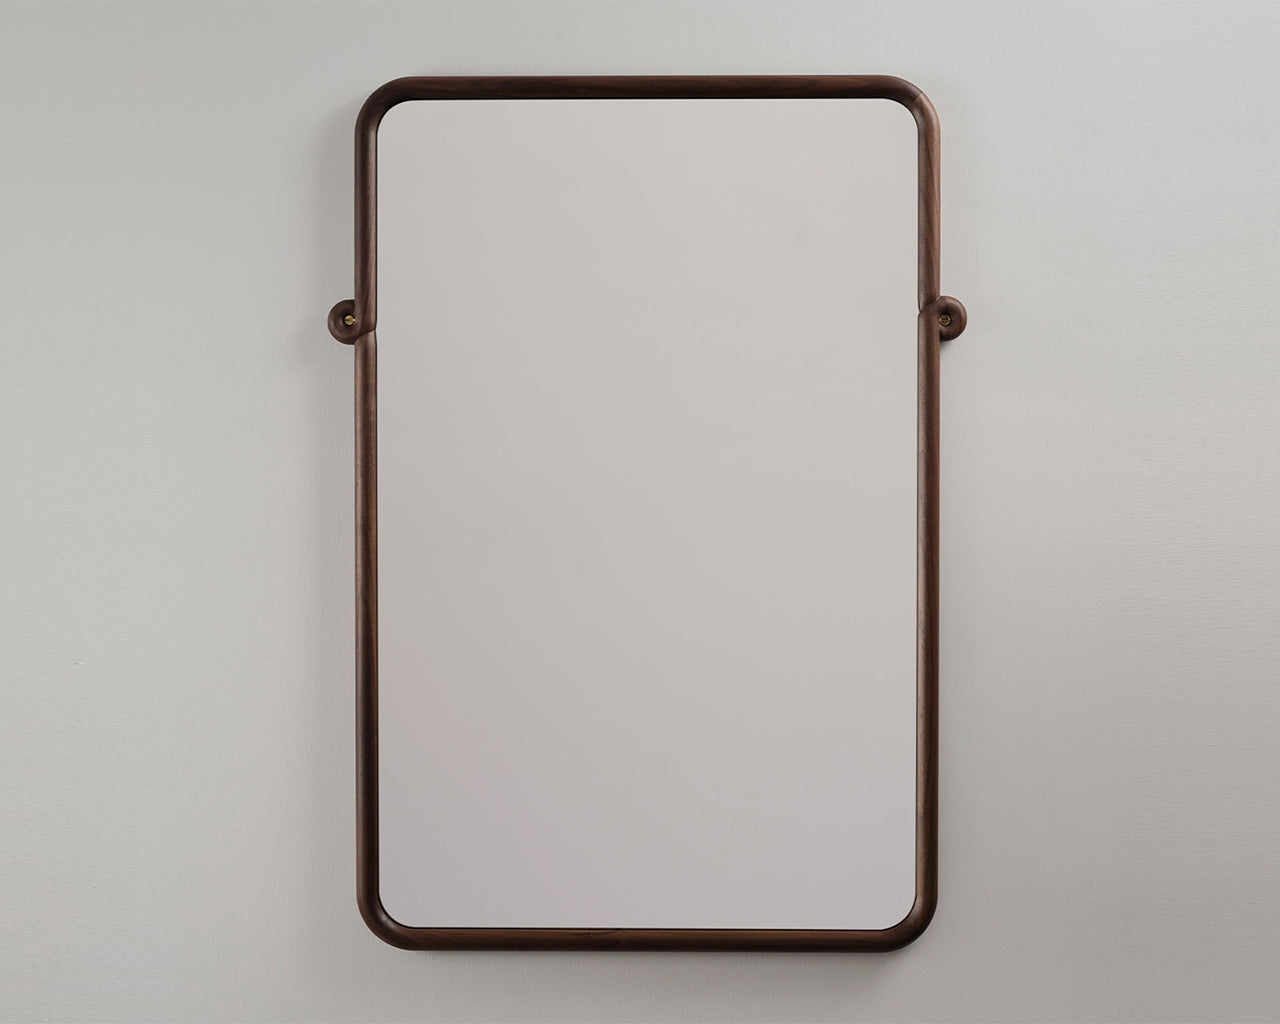 Knot Mirror - Rectangle